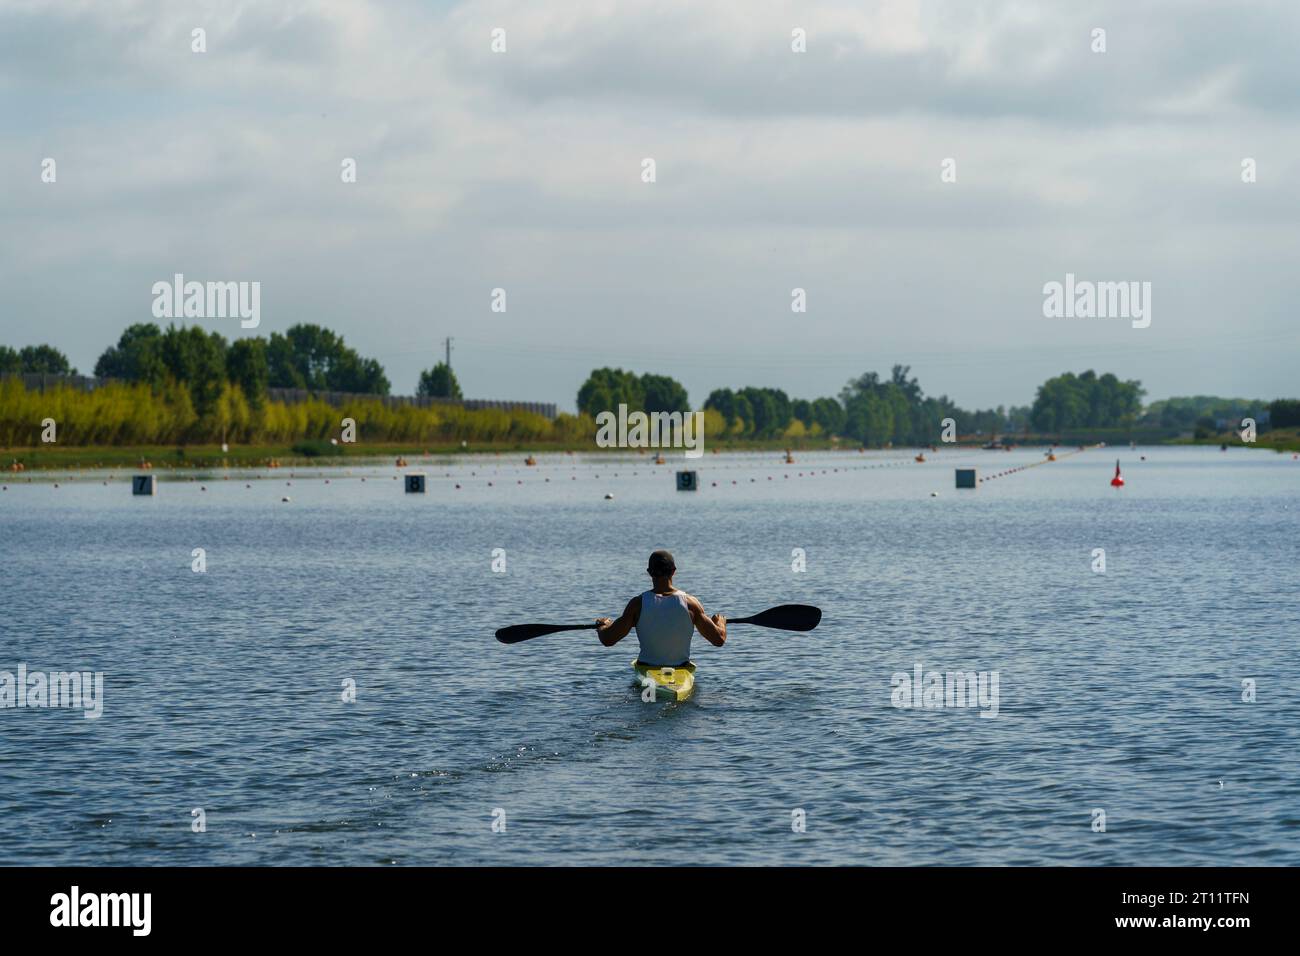 Canoeist during a training session Stock Photo